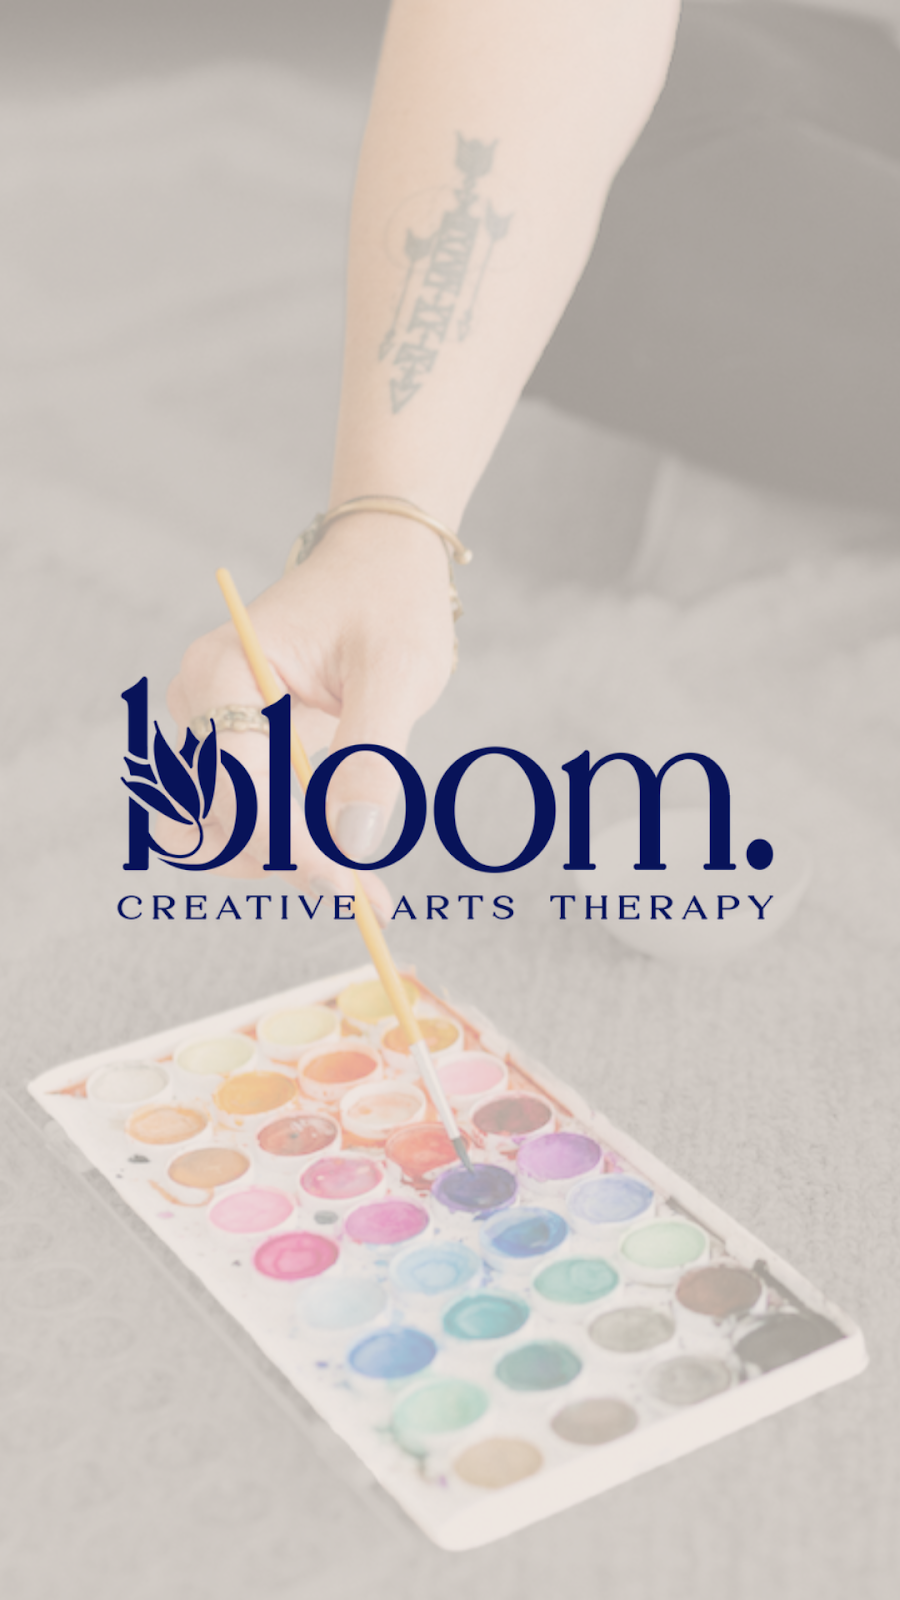 Bloom. Creative Arts Therapy Services PLLC | 1131 State Rte 55, Lagrangeville, NY 12540 | Phone: (914) 487-9600